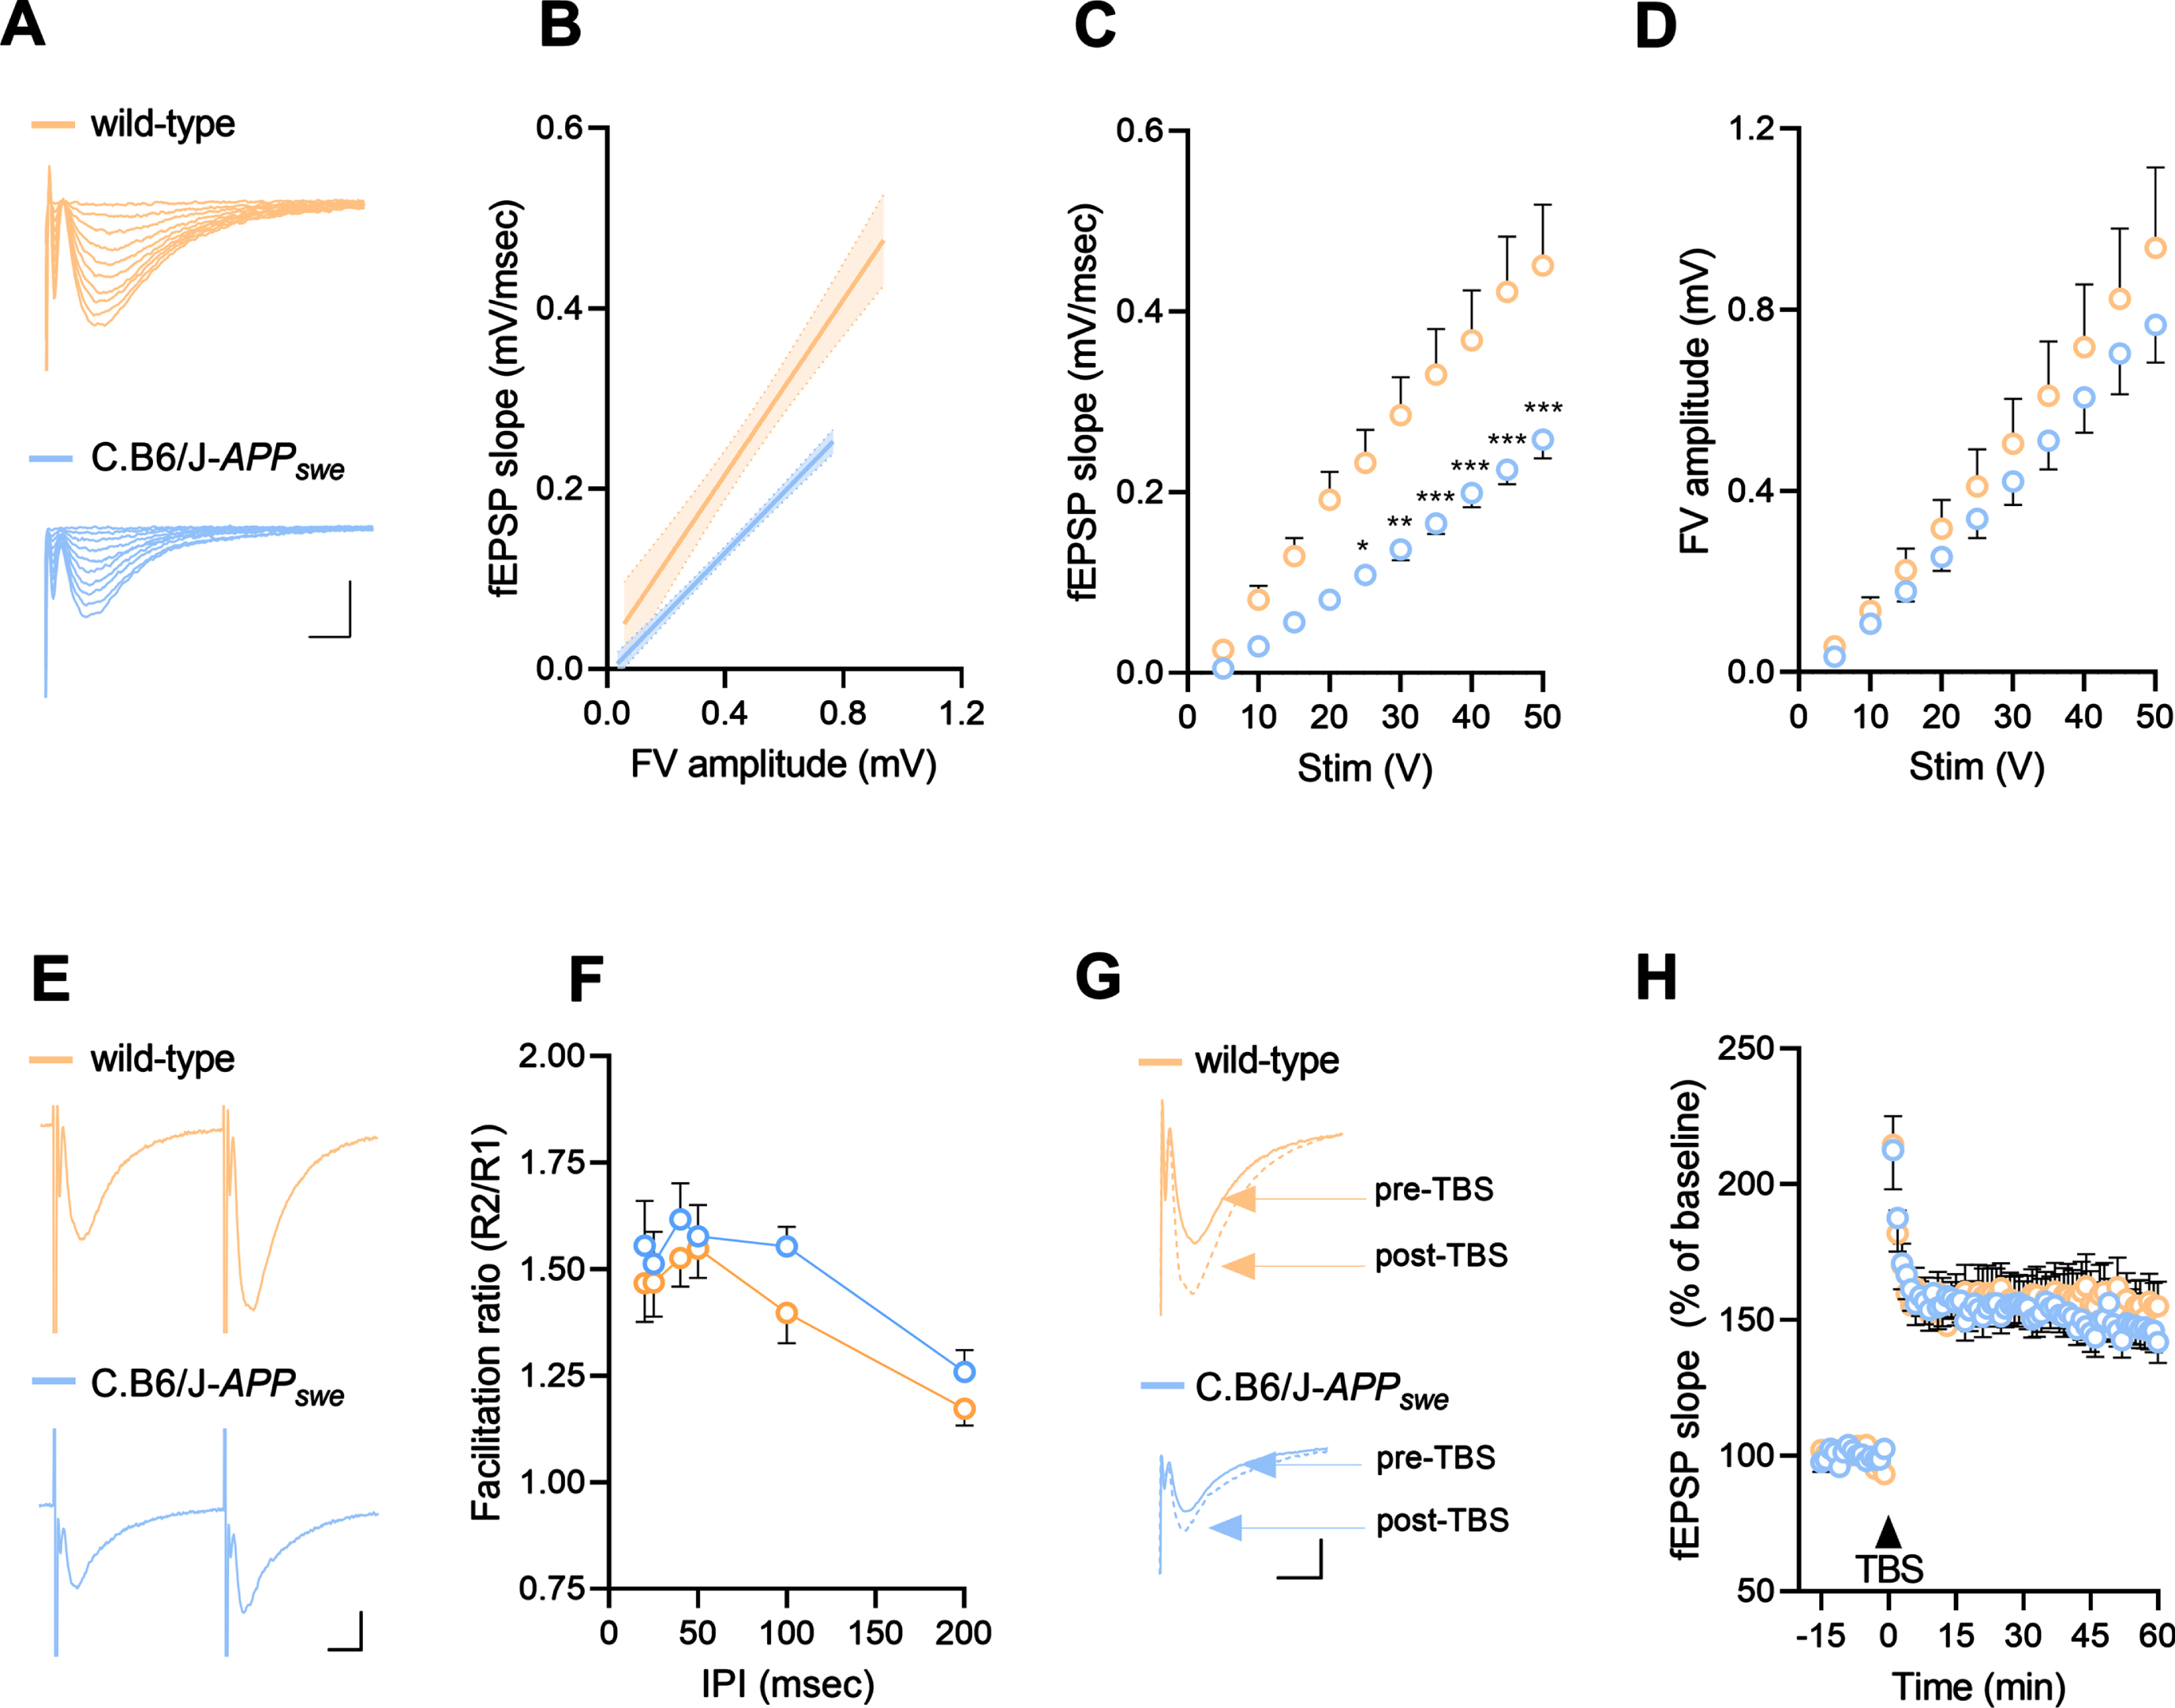 C.B6/J-APPswe mice show impaired synaptic transmission but preserved synaptic plasticity. A) Representative CA1 local field potentials responses obtained with stimulation intensities ranging from 5 through 50 V recorded in wild-type and C.B6/J-APPswe mice. Scale bars = 0.5 mV, 5 ms. B) Linear regression of the input-output curves of wild-type and C.B6/J-APPswe mice obtained plotting field excitatory post-synaptic potential (fEPSP) slope versus fiber volley (FV) amplitude for each stimulus strength. C.B6/J-APPswe mice (18 slices/7 mice) had a significantly lower slope than wild-type animals (15 slices/6 mice). C, D) Relationship between stimulus intensity and fEPSP slope (C) or FV amplitude (D) of wild-type and C.B6/J-APPswe mice. When plotted against stimulus strengths, fEPSP slopes are significantly lower in congenic (18 slices/7 mice) versus wild-type (15 slices/6 mice) mice, while the FV amplitudes showed no significant differences between the two genotypes. E) Representative traces after paired stimulations 50 ms apart in wild-type and C.B6/J-APPswe mice. Scale bars = 0.4 mV, 10 ms. F) Mean ratios of fEPSP slopes at each interpulse interval (IPI) of wild-type and C.B6/J-APPswe mice. No significant differences were found comparing congenic (19 slices/7 mice) and control (15 slices/6 mice) mice. G) Representative fEPSPs recorded during baseline (pre-theta-burst stimulation (TBS)) and 50–60 min after TBS (post-TBS) of wild-type and C.B6/J-APPswe mice. Scale bars = 0.4 mV, 10 ms. H) Time course changes of the average normalized (against baseline) fEPSP slope before and after TBS-induced Long-Term Potentiation in wild-type and C.B6/J-APPswe mice. TBS protocol was delivered at the time indicated by the arrow. No significant differences were found comparing congenic (19 slices/7 mice) and control (14 slices/6 mice) mice. Male (n = 4) and female (n = 3) C.B6/J-APPswe animals as well as male (n = 3) and female (n = 3) wild-type animals were grouped as no differences were found between sexes. Data are expressed as mean±SEM. Two-way ANOVA and Bonferroni’s test: *p < 0.05, **p < 0.01, ***p < 0.001 [versus wild-type mice].